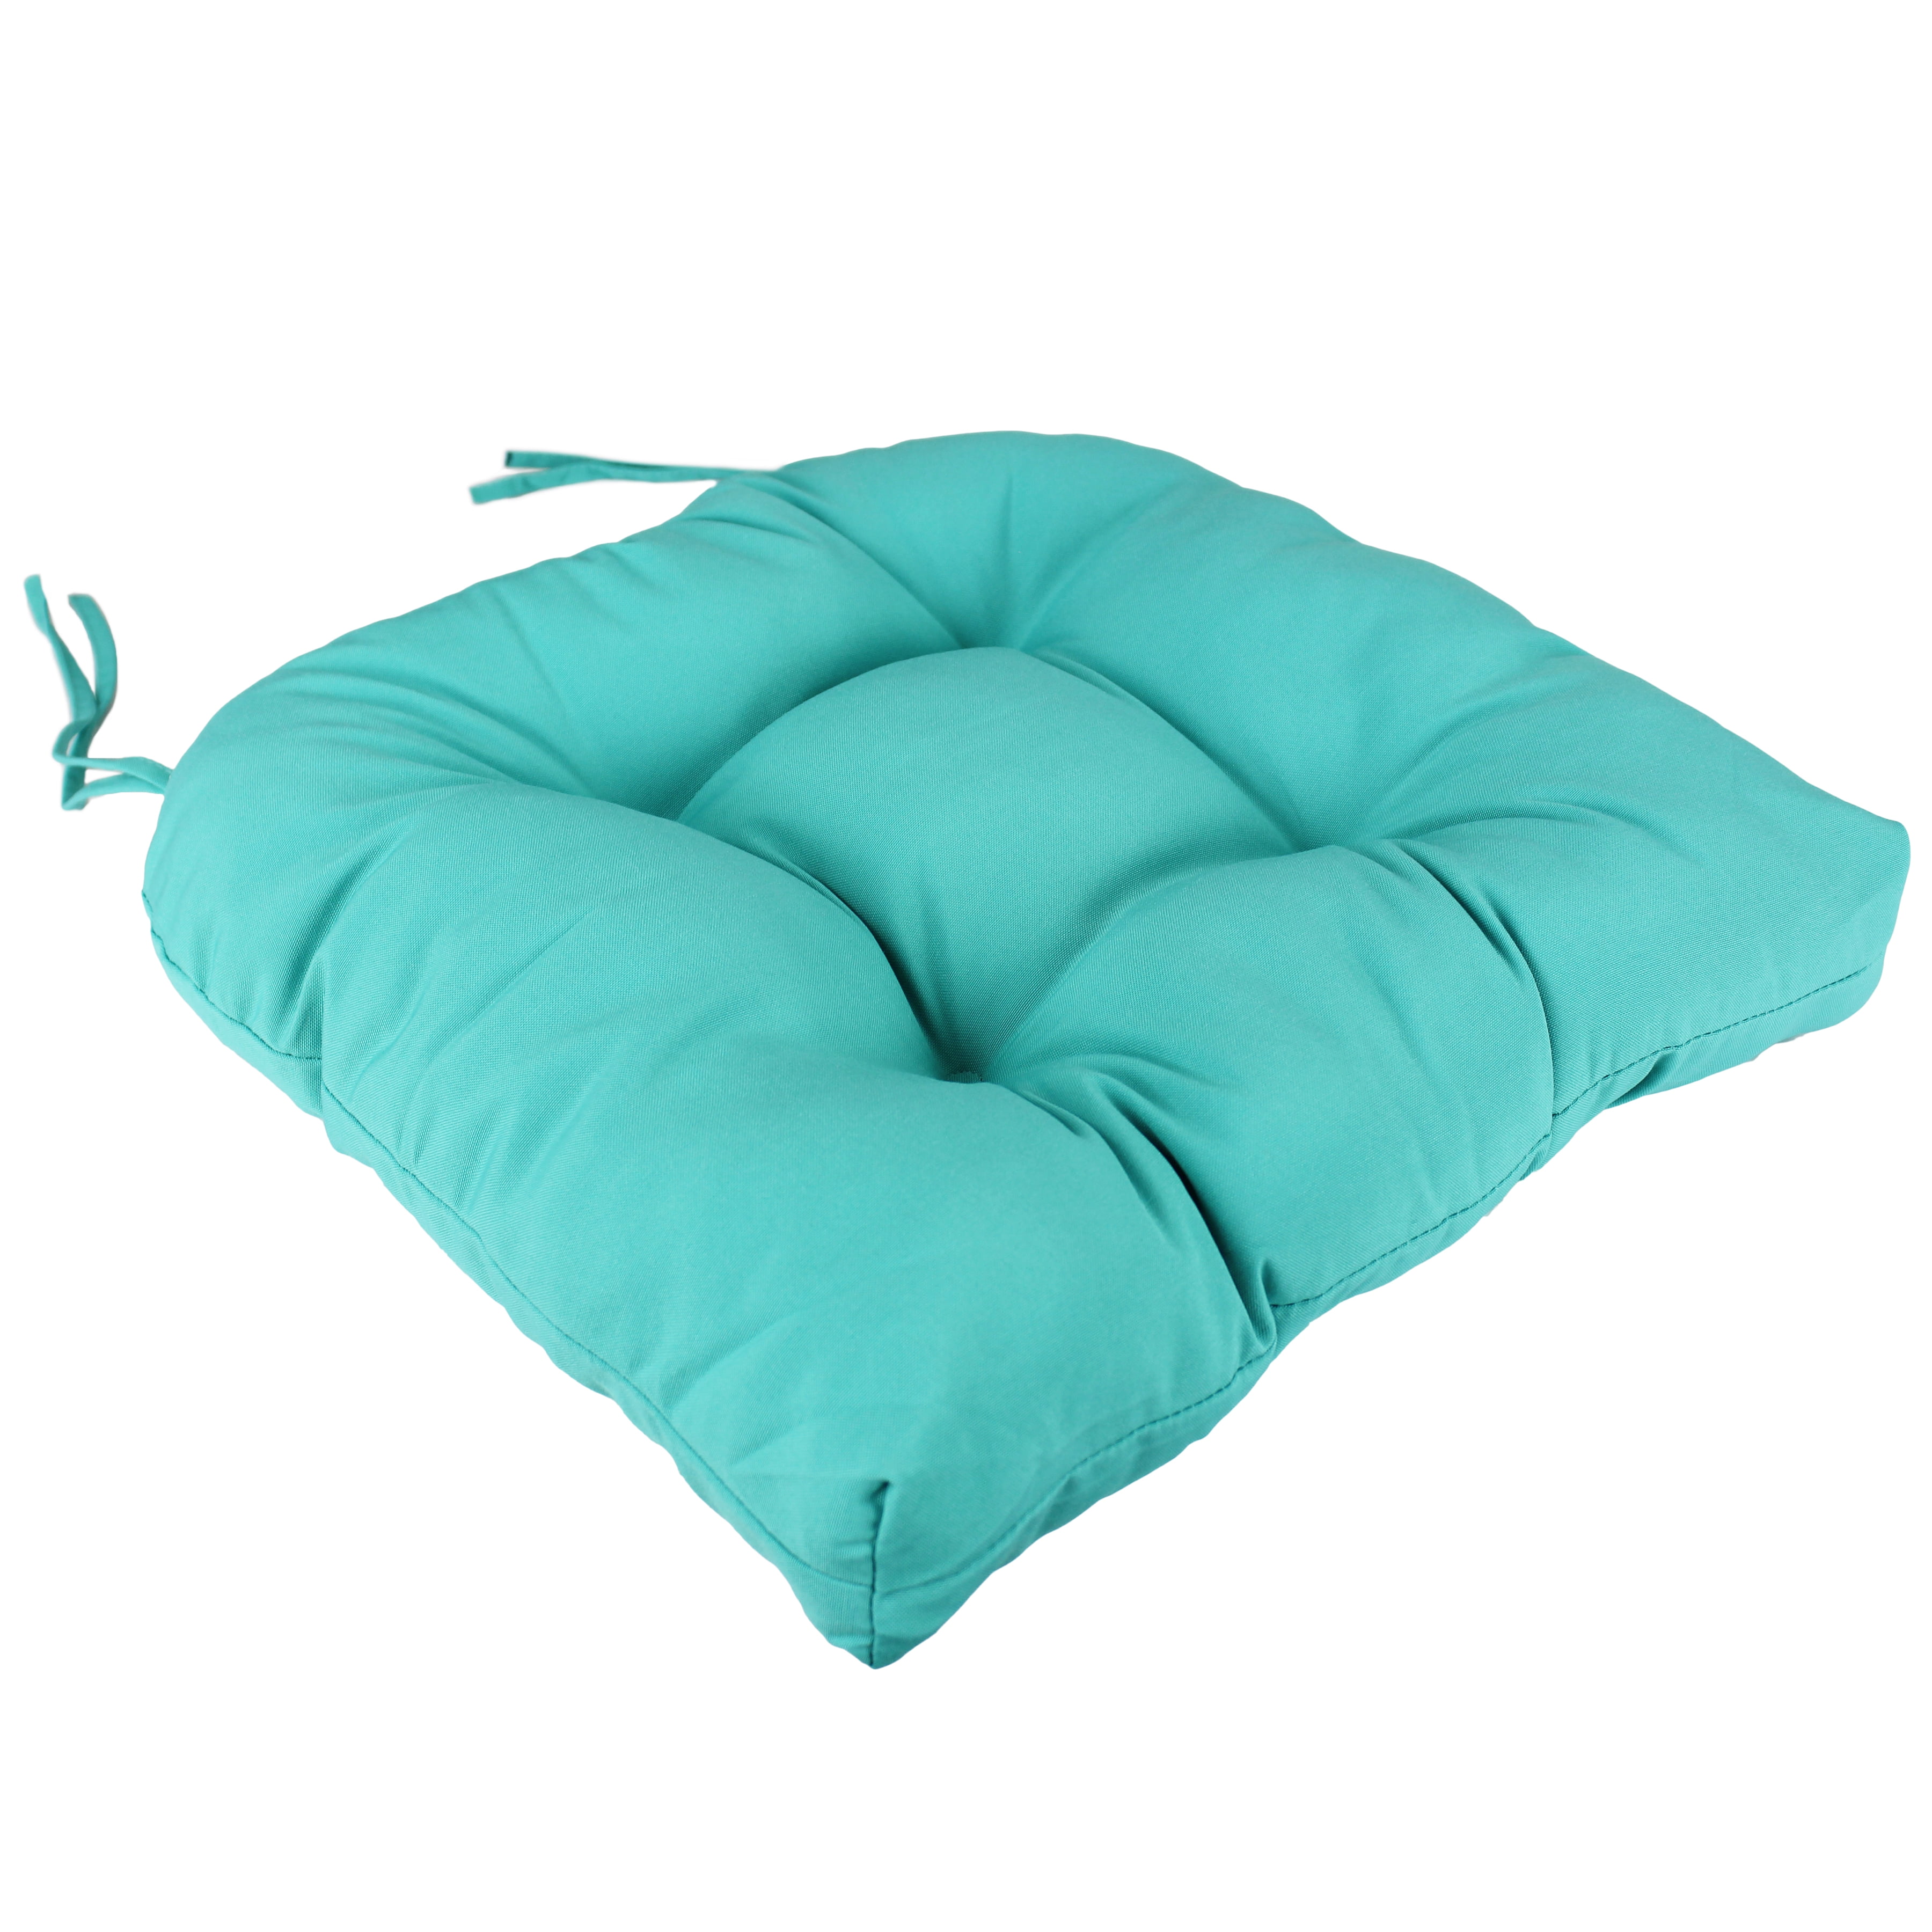 What Is The Most Comfortable Cushion To Buy?